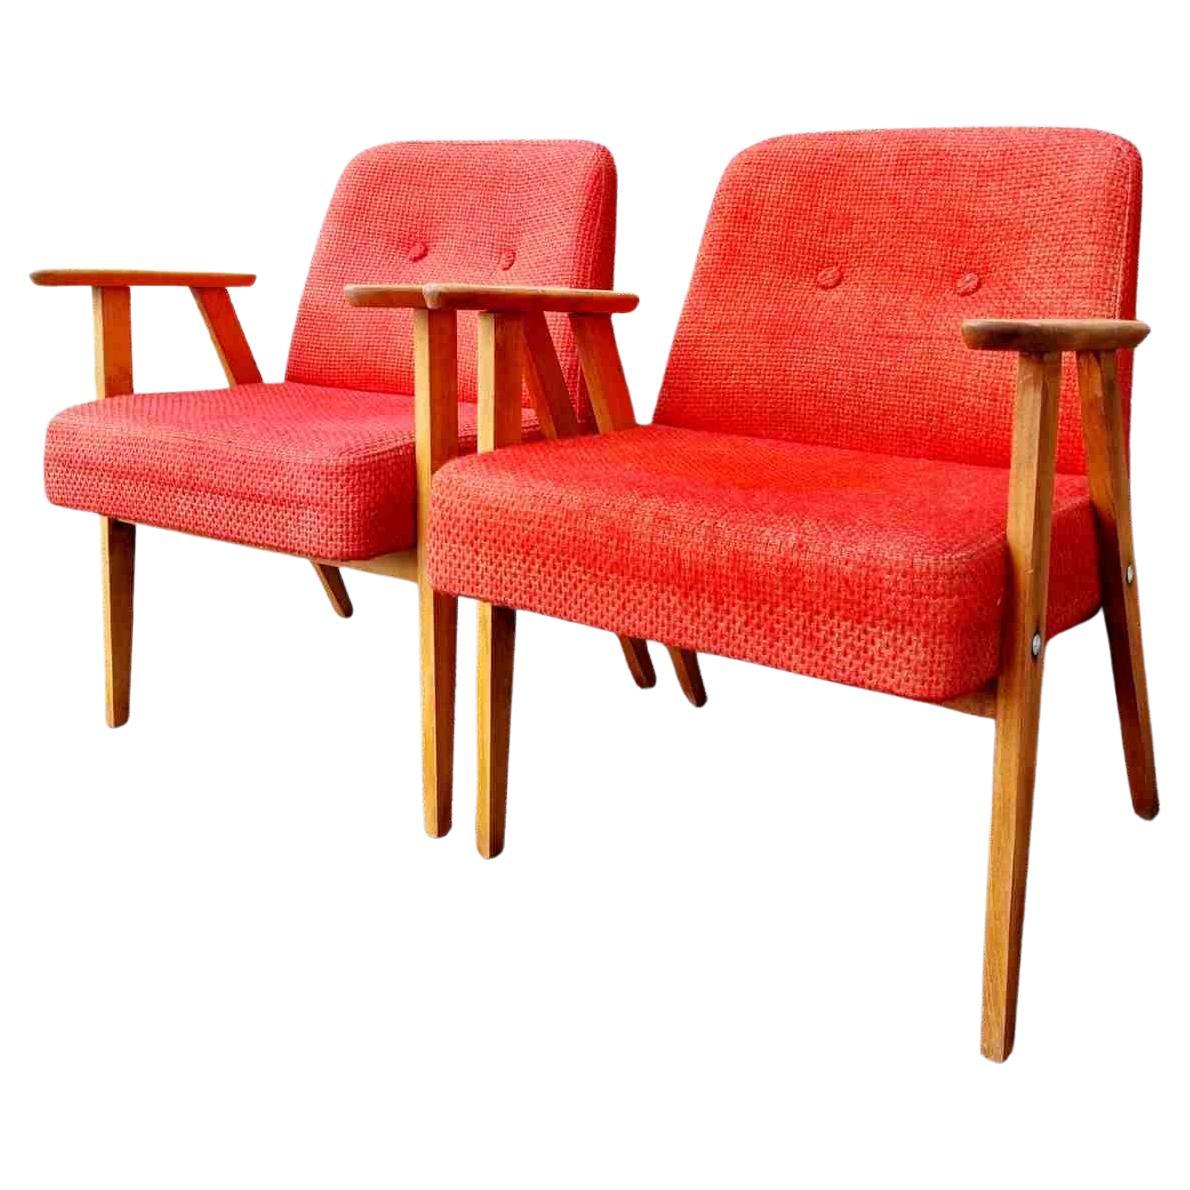 Pair of Midcentury Polish Armchairs, Model 366, Design by Jozef Chierowski 60s For Sale